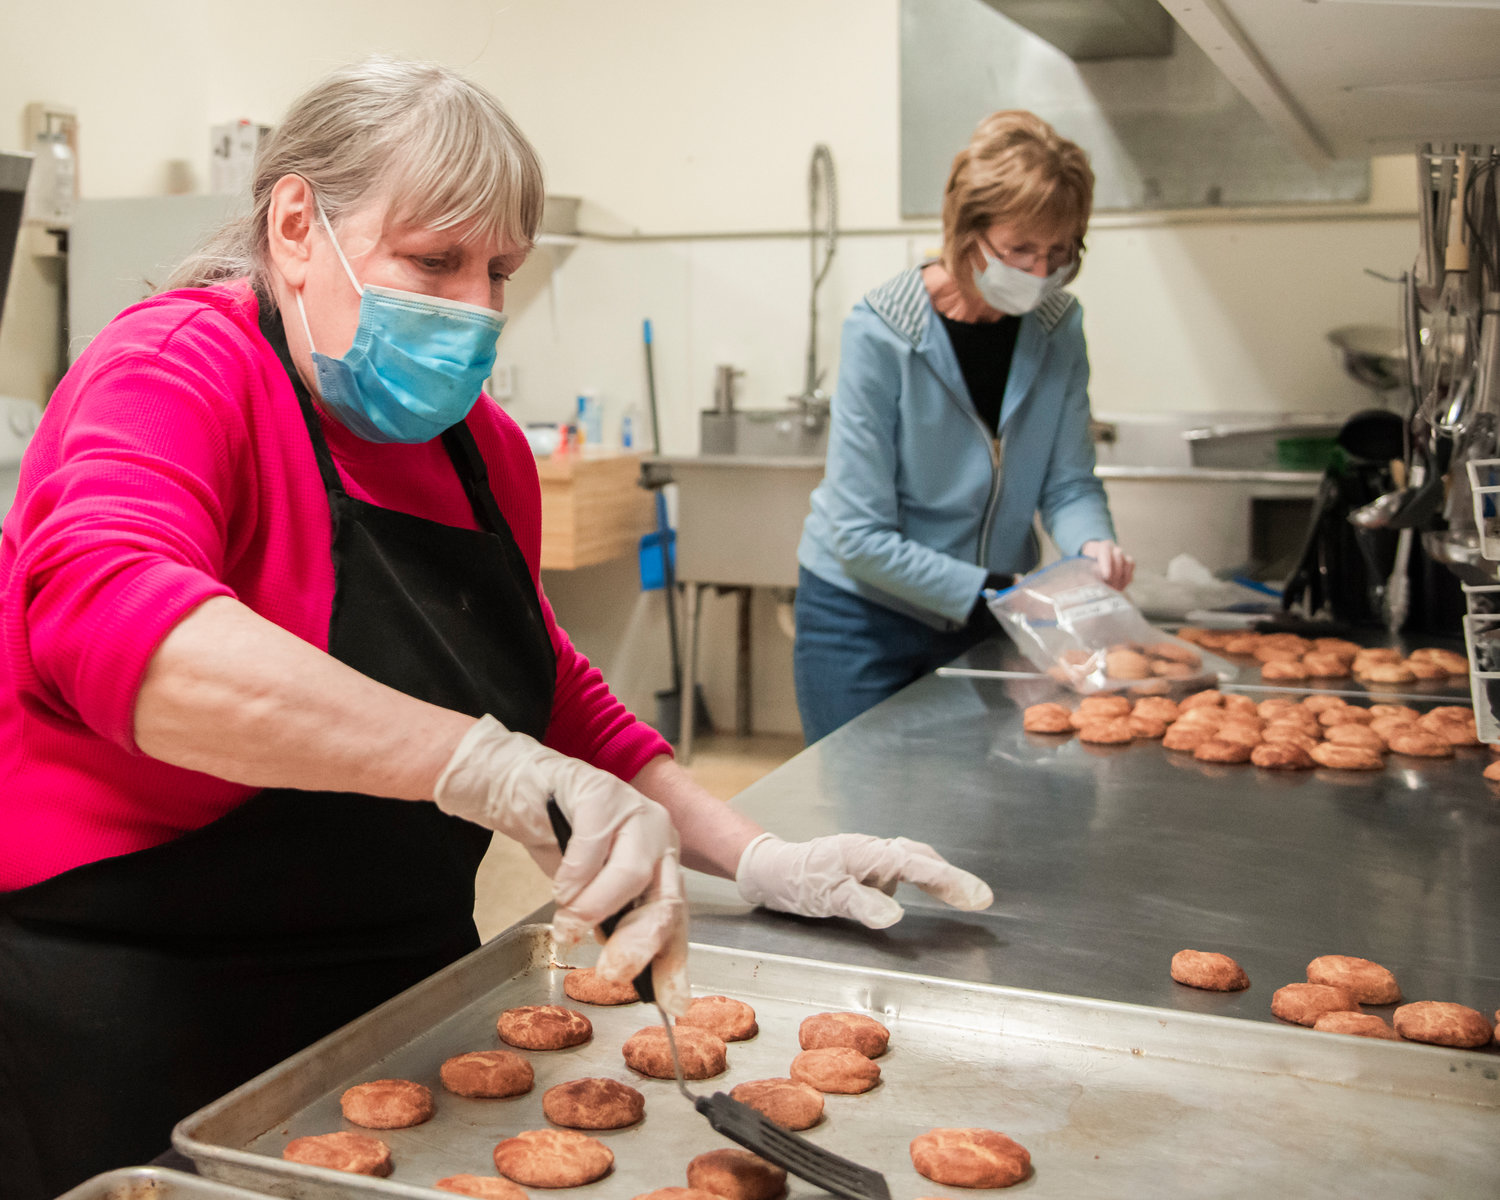 Judi Howard uses a spatula to remove snickerdoodle cookies from a pan before they are put into bags by Kay Klovdahl in preparation for Christmas meals at the Community Church of God in Centralia, Saturday morning.